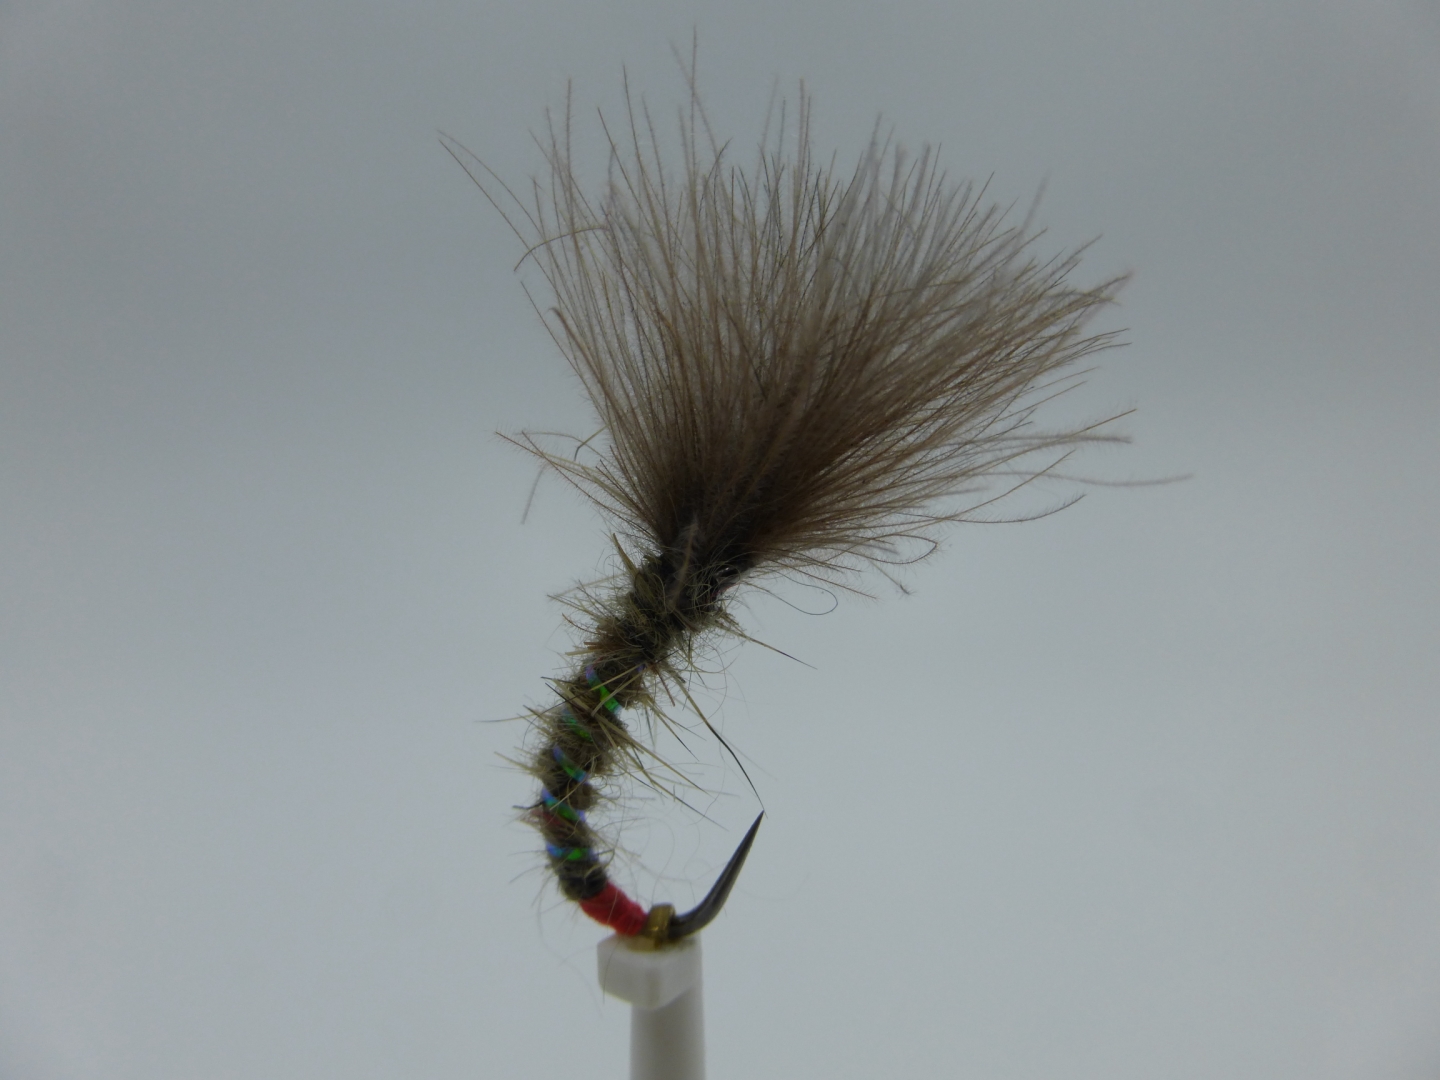 Size 18 CDC Owl Hare,s Ear Barbless